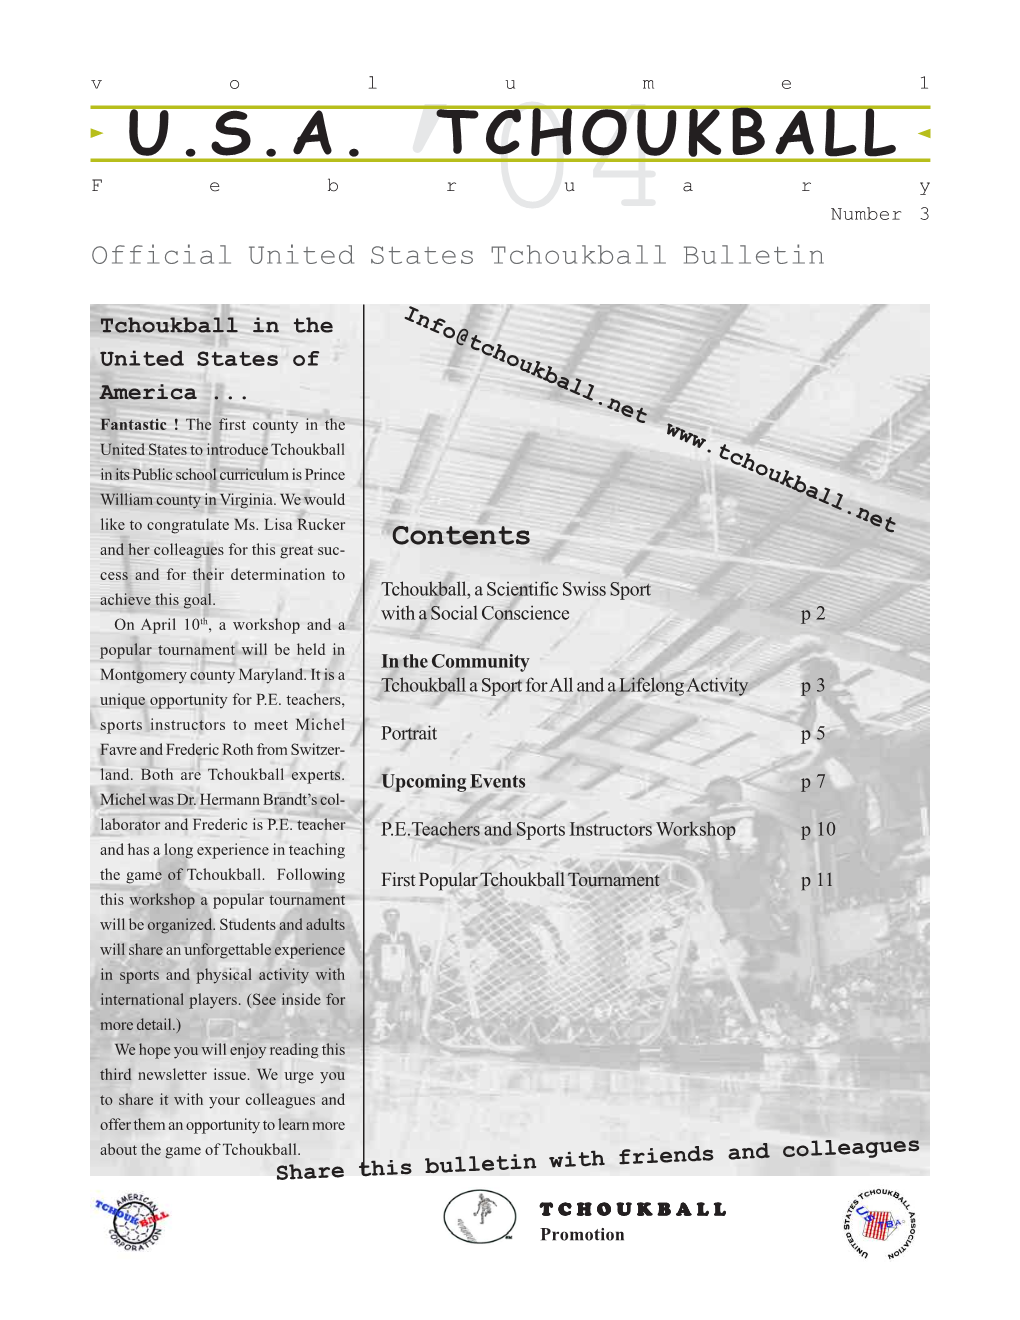 U.S.A. TCHOUKBALL February ’04 Number 3 Official United States Tchoukball Bulletin